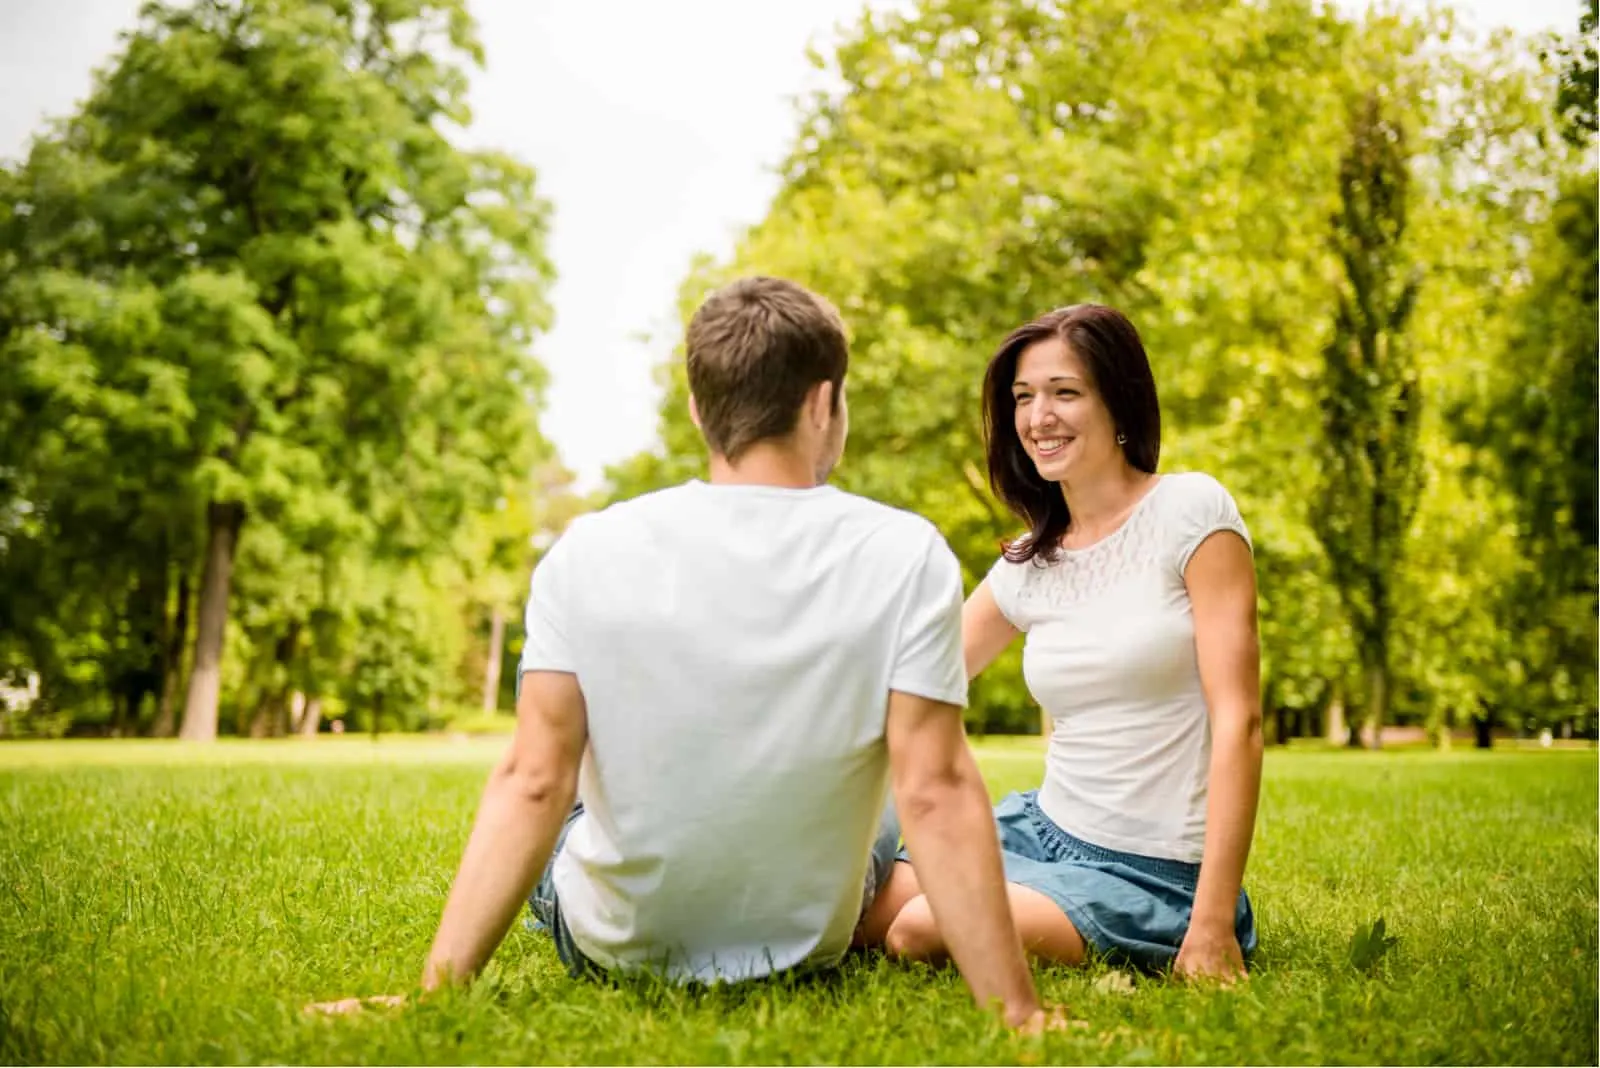 a smiling woman talking to a man while sitting on the grass in the park